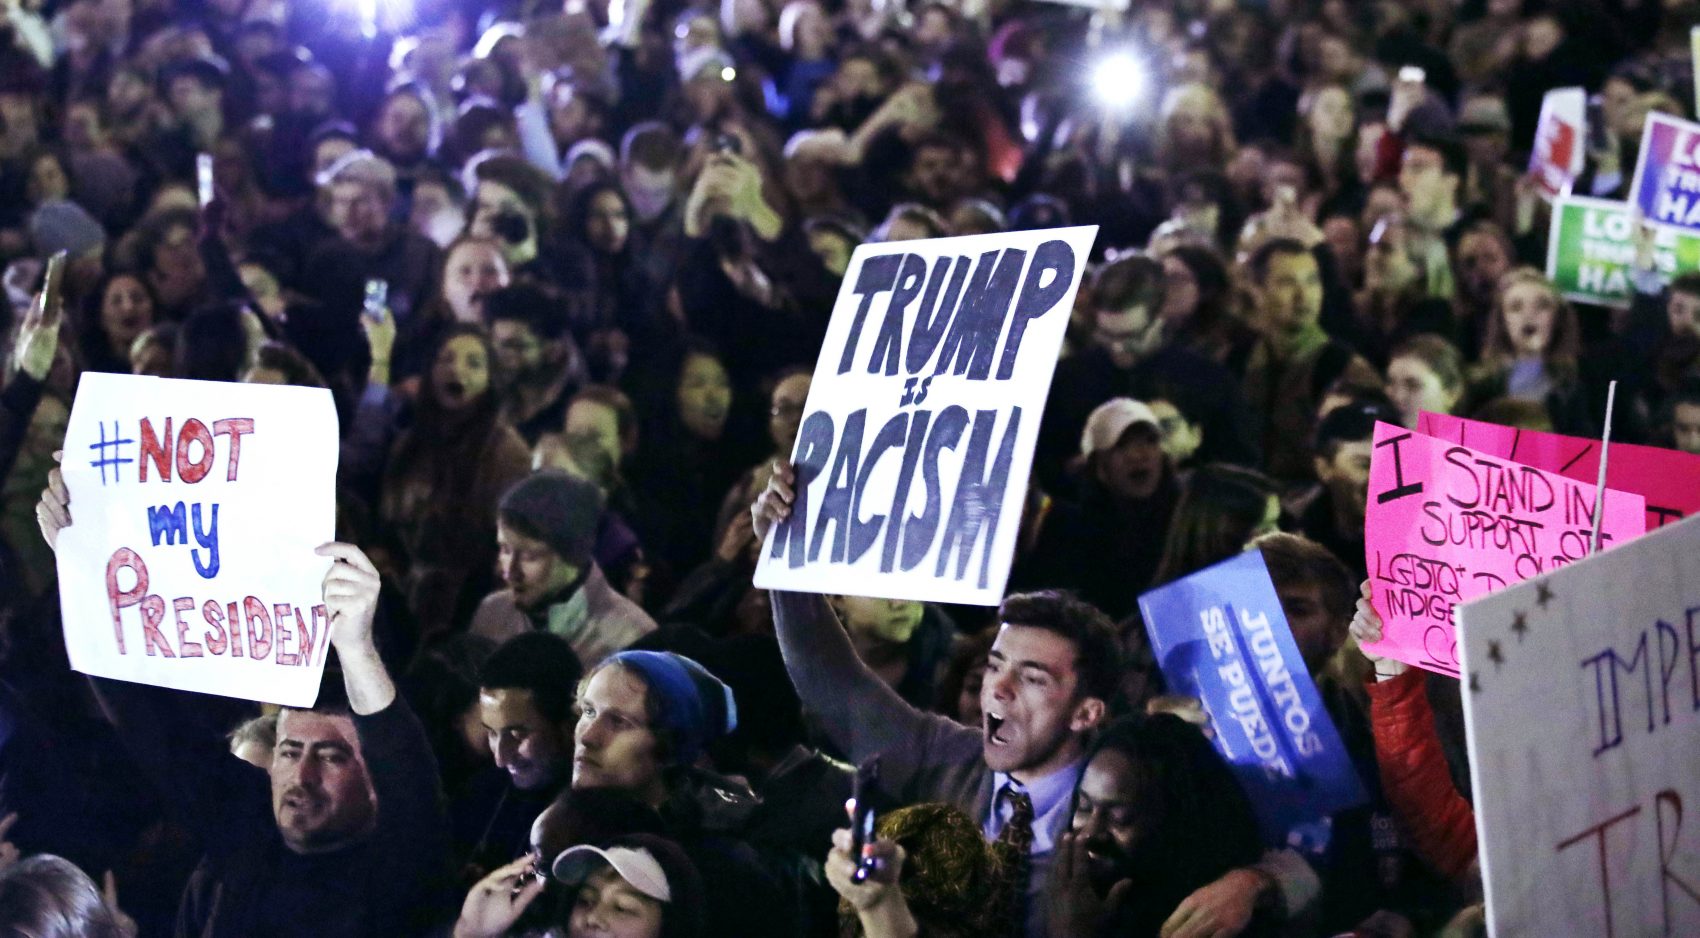 Hundreds protest in opposition of Donald Trump's presidential election victory on Boston Common Wednesday evening. (Charles Krupa/AP)